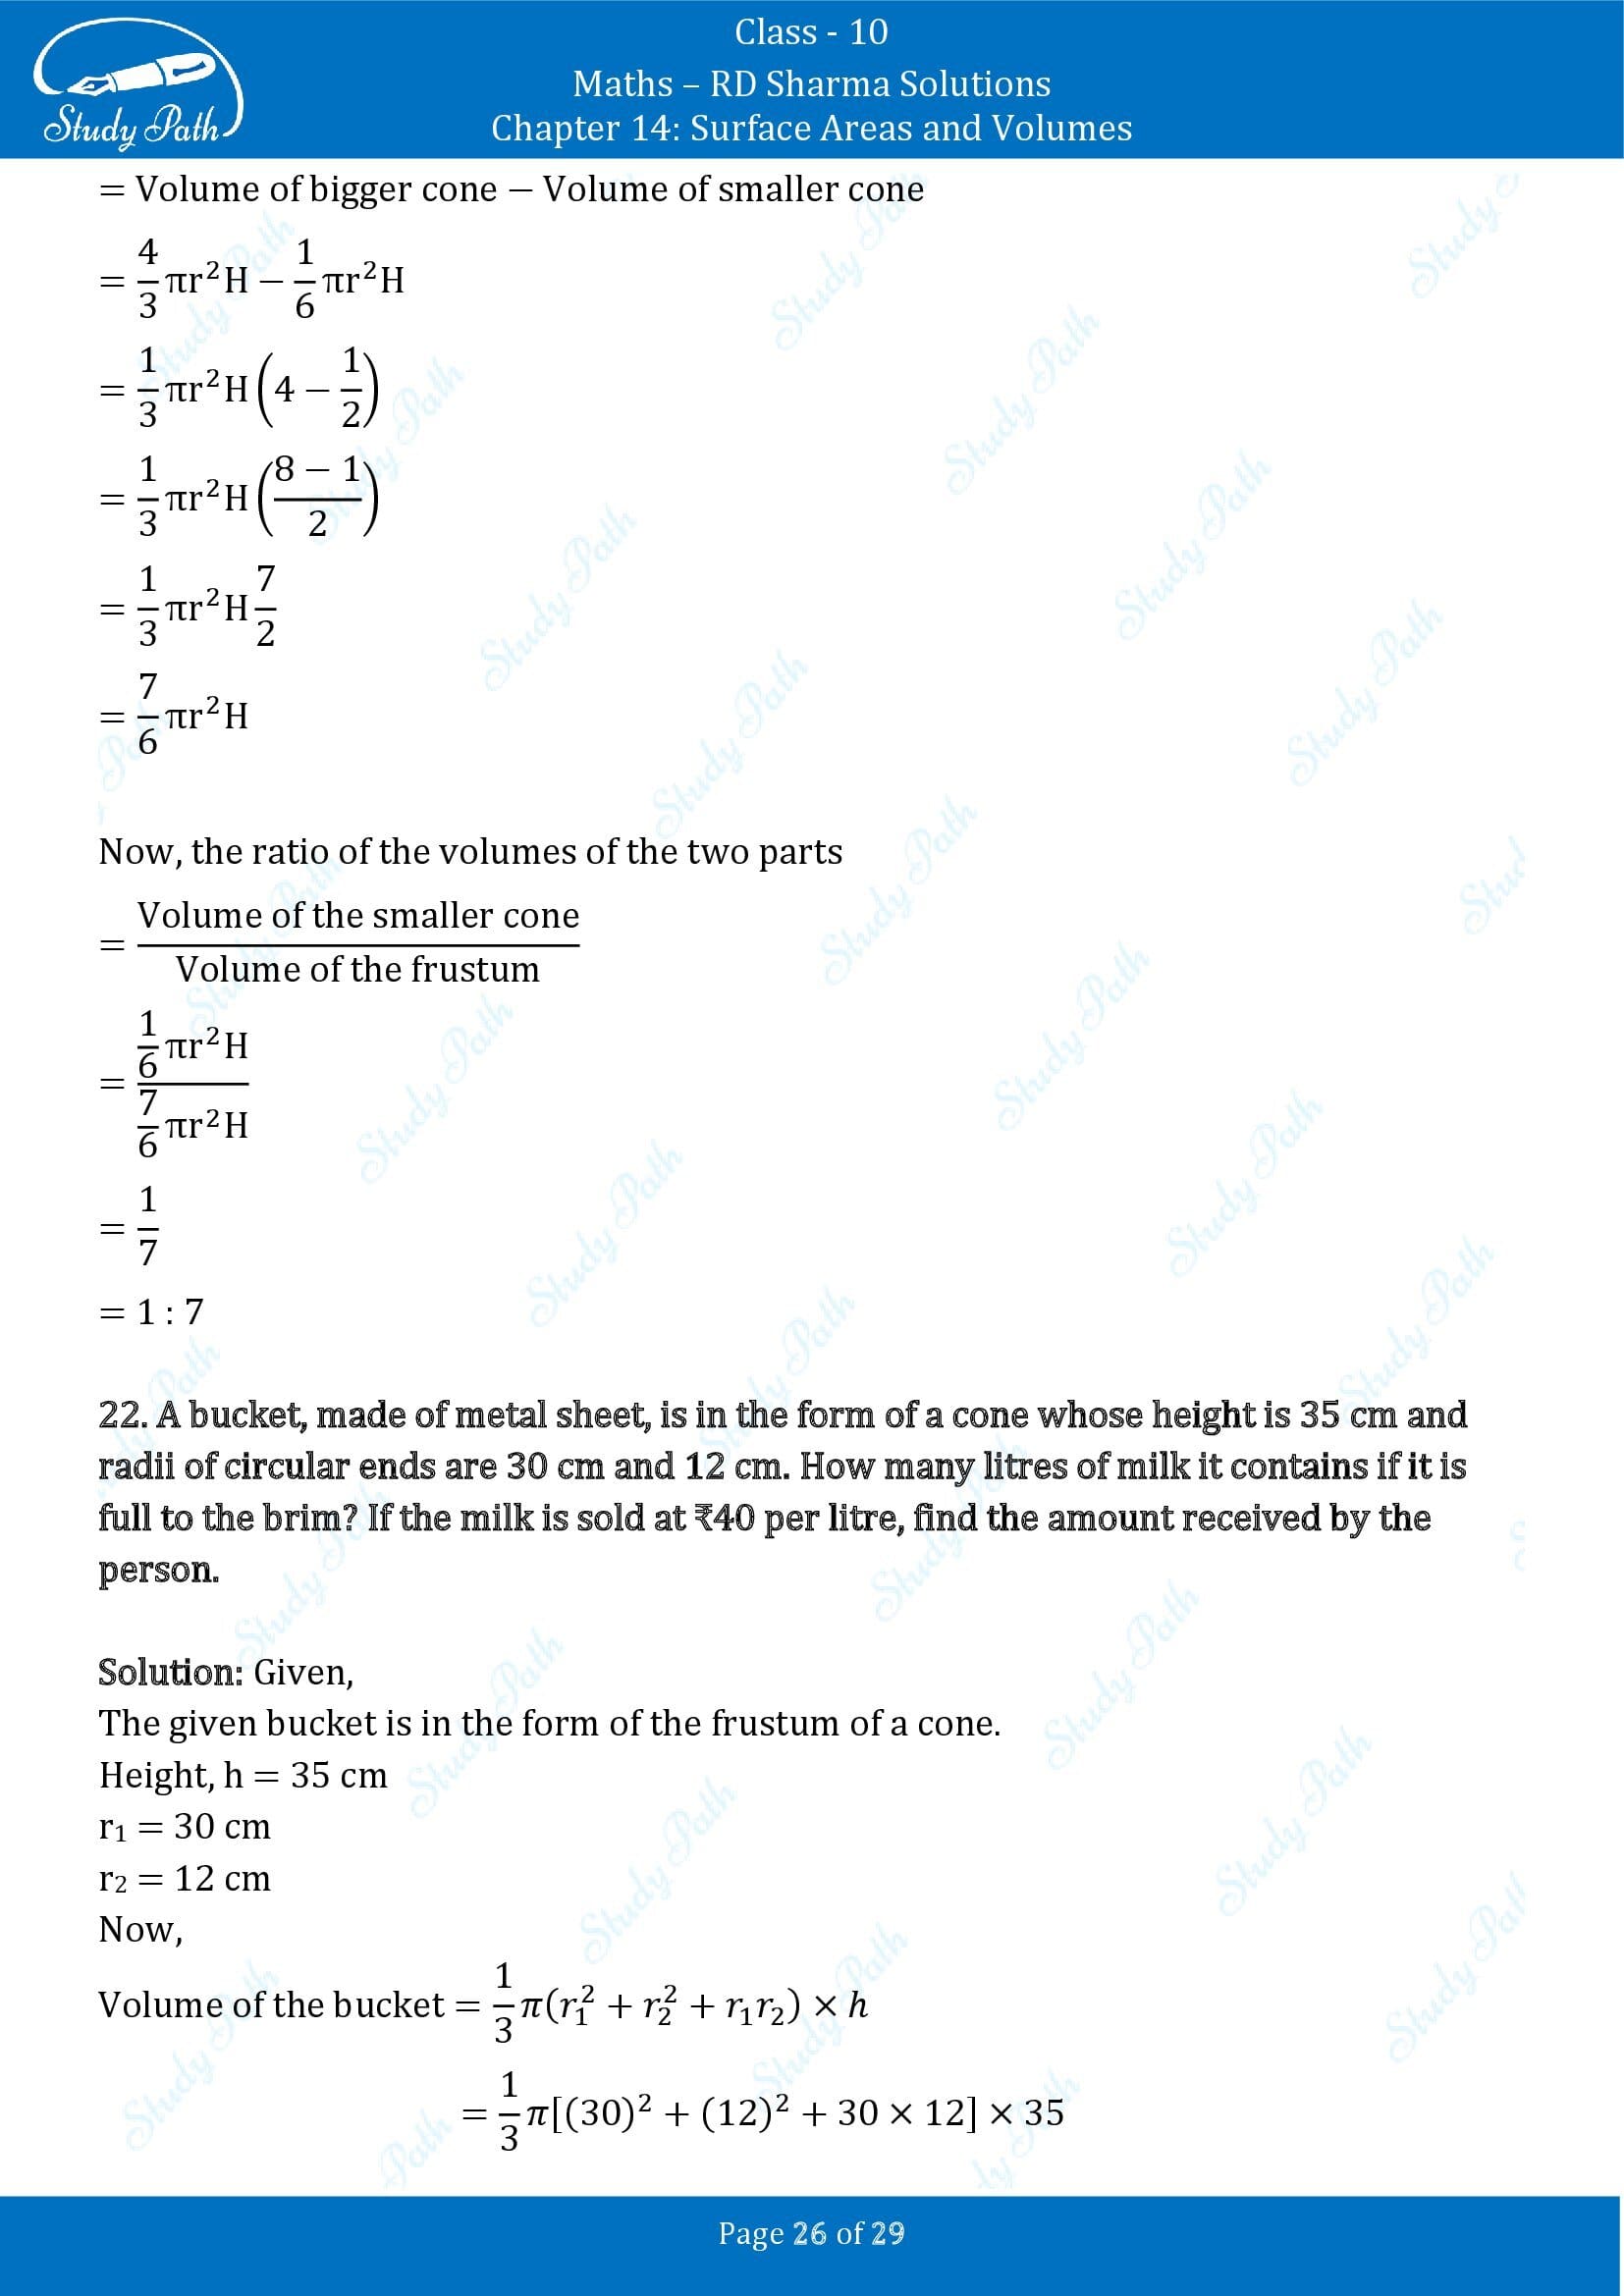 RD Sharma Solutions Class 10 Chapter 14 Surface Areas and Volumes Exercise 14.3 00026